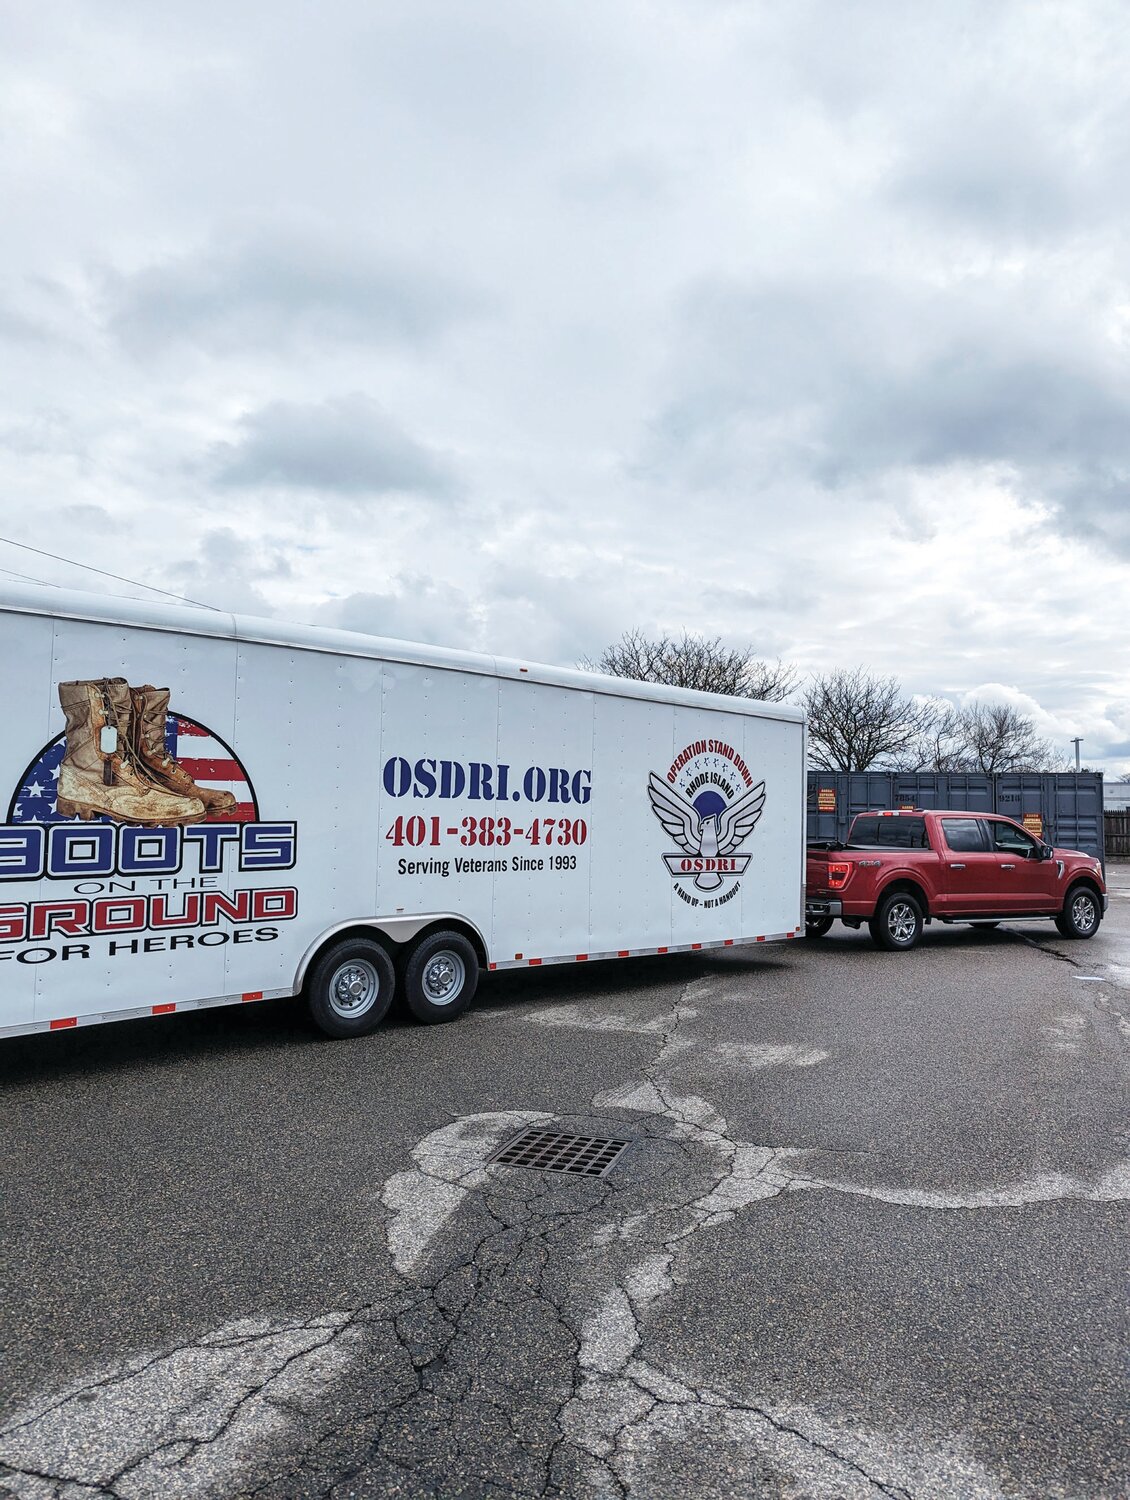 FLOOD OF SUPPORT: Flood Ford donated a Ford F-250 to OSDRI to help transport the 30-foot Boots on the Ground trailer from Johnston to Newport.